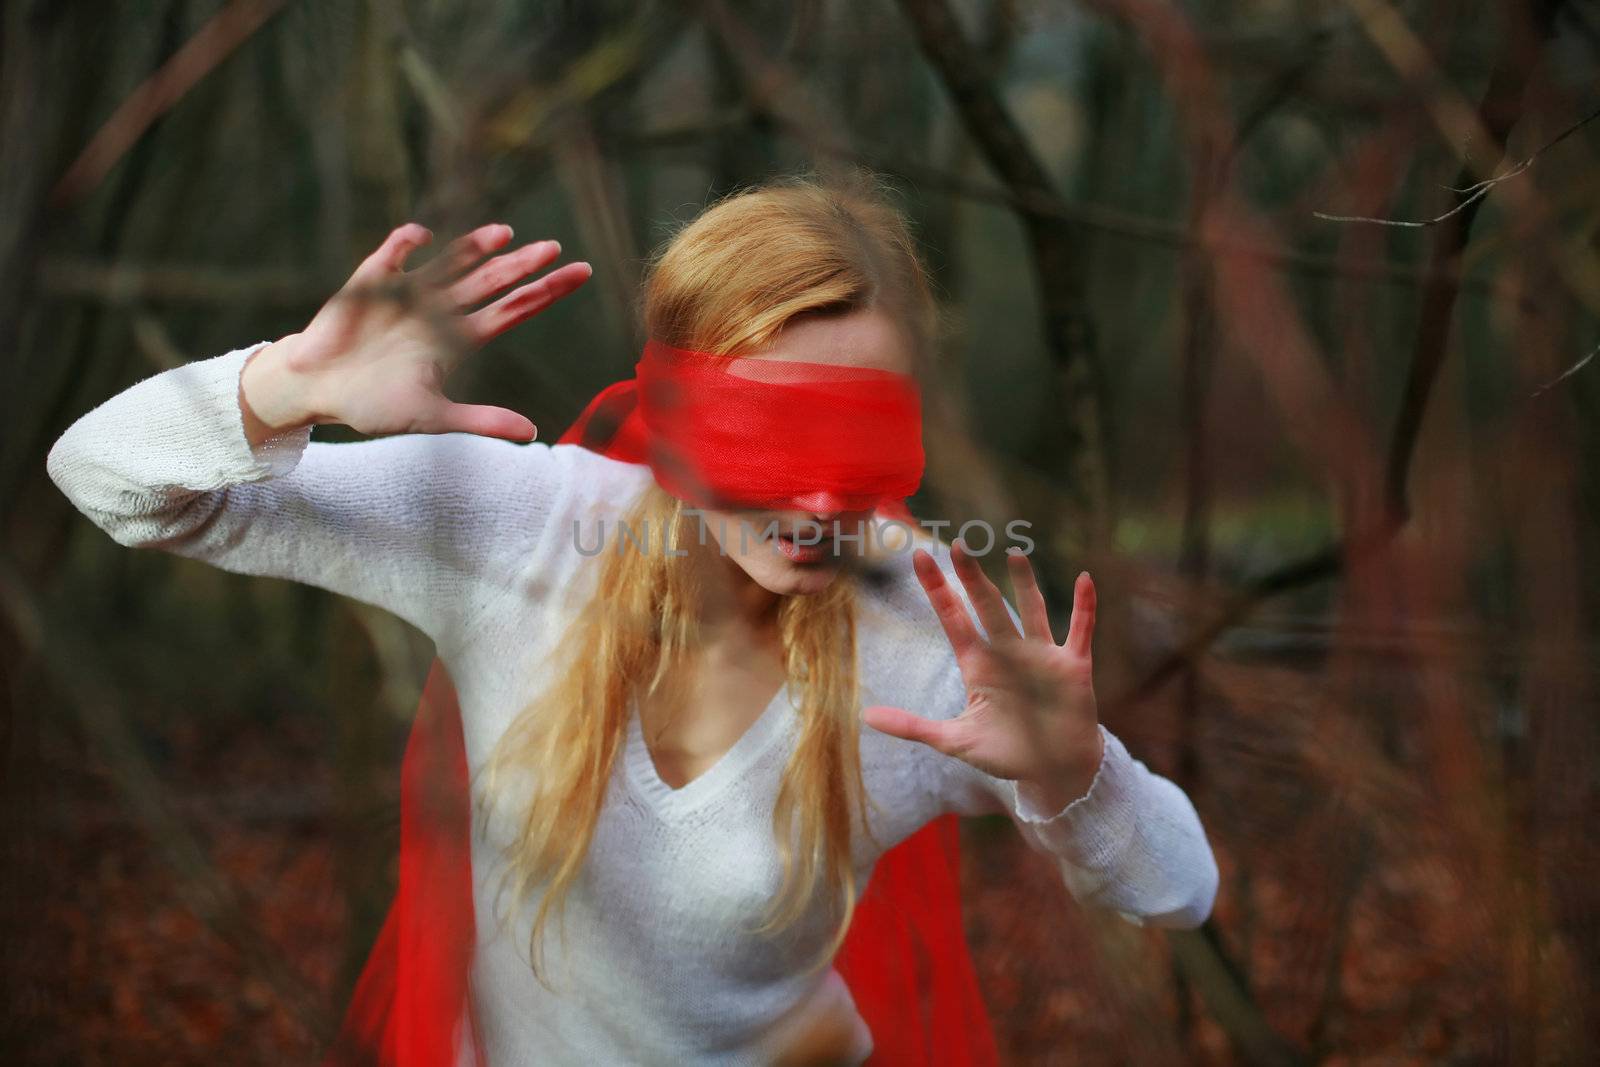 An image of woman with red blindfold in a forest